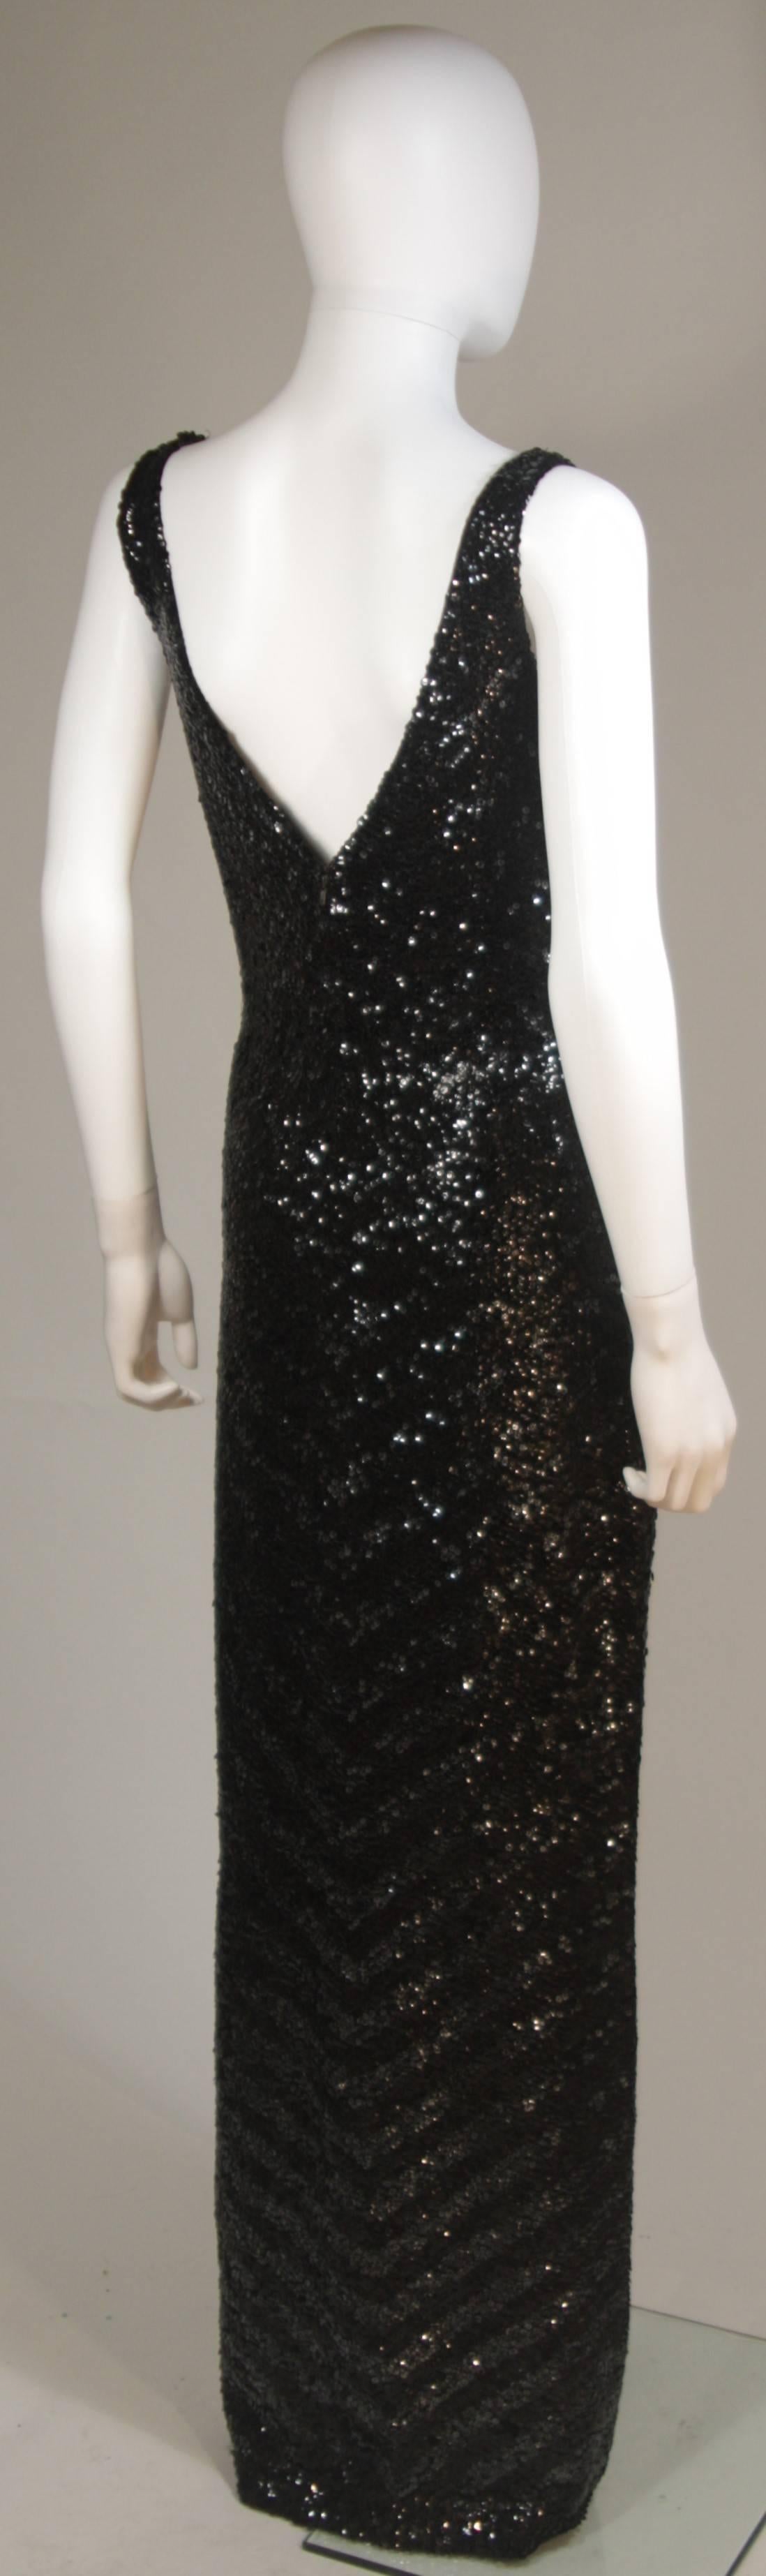 GENE SHELLY'S INTERNATIONAL Black Sequined Stretch Wool Gown Size 12 1